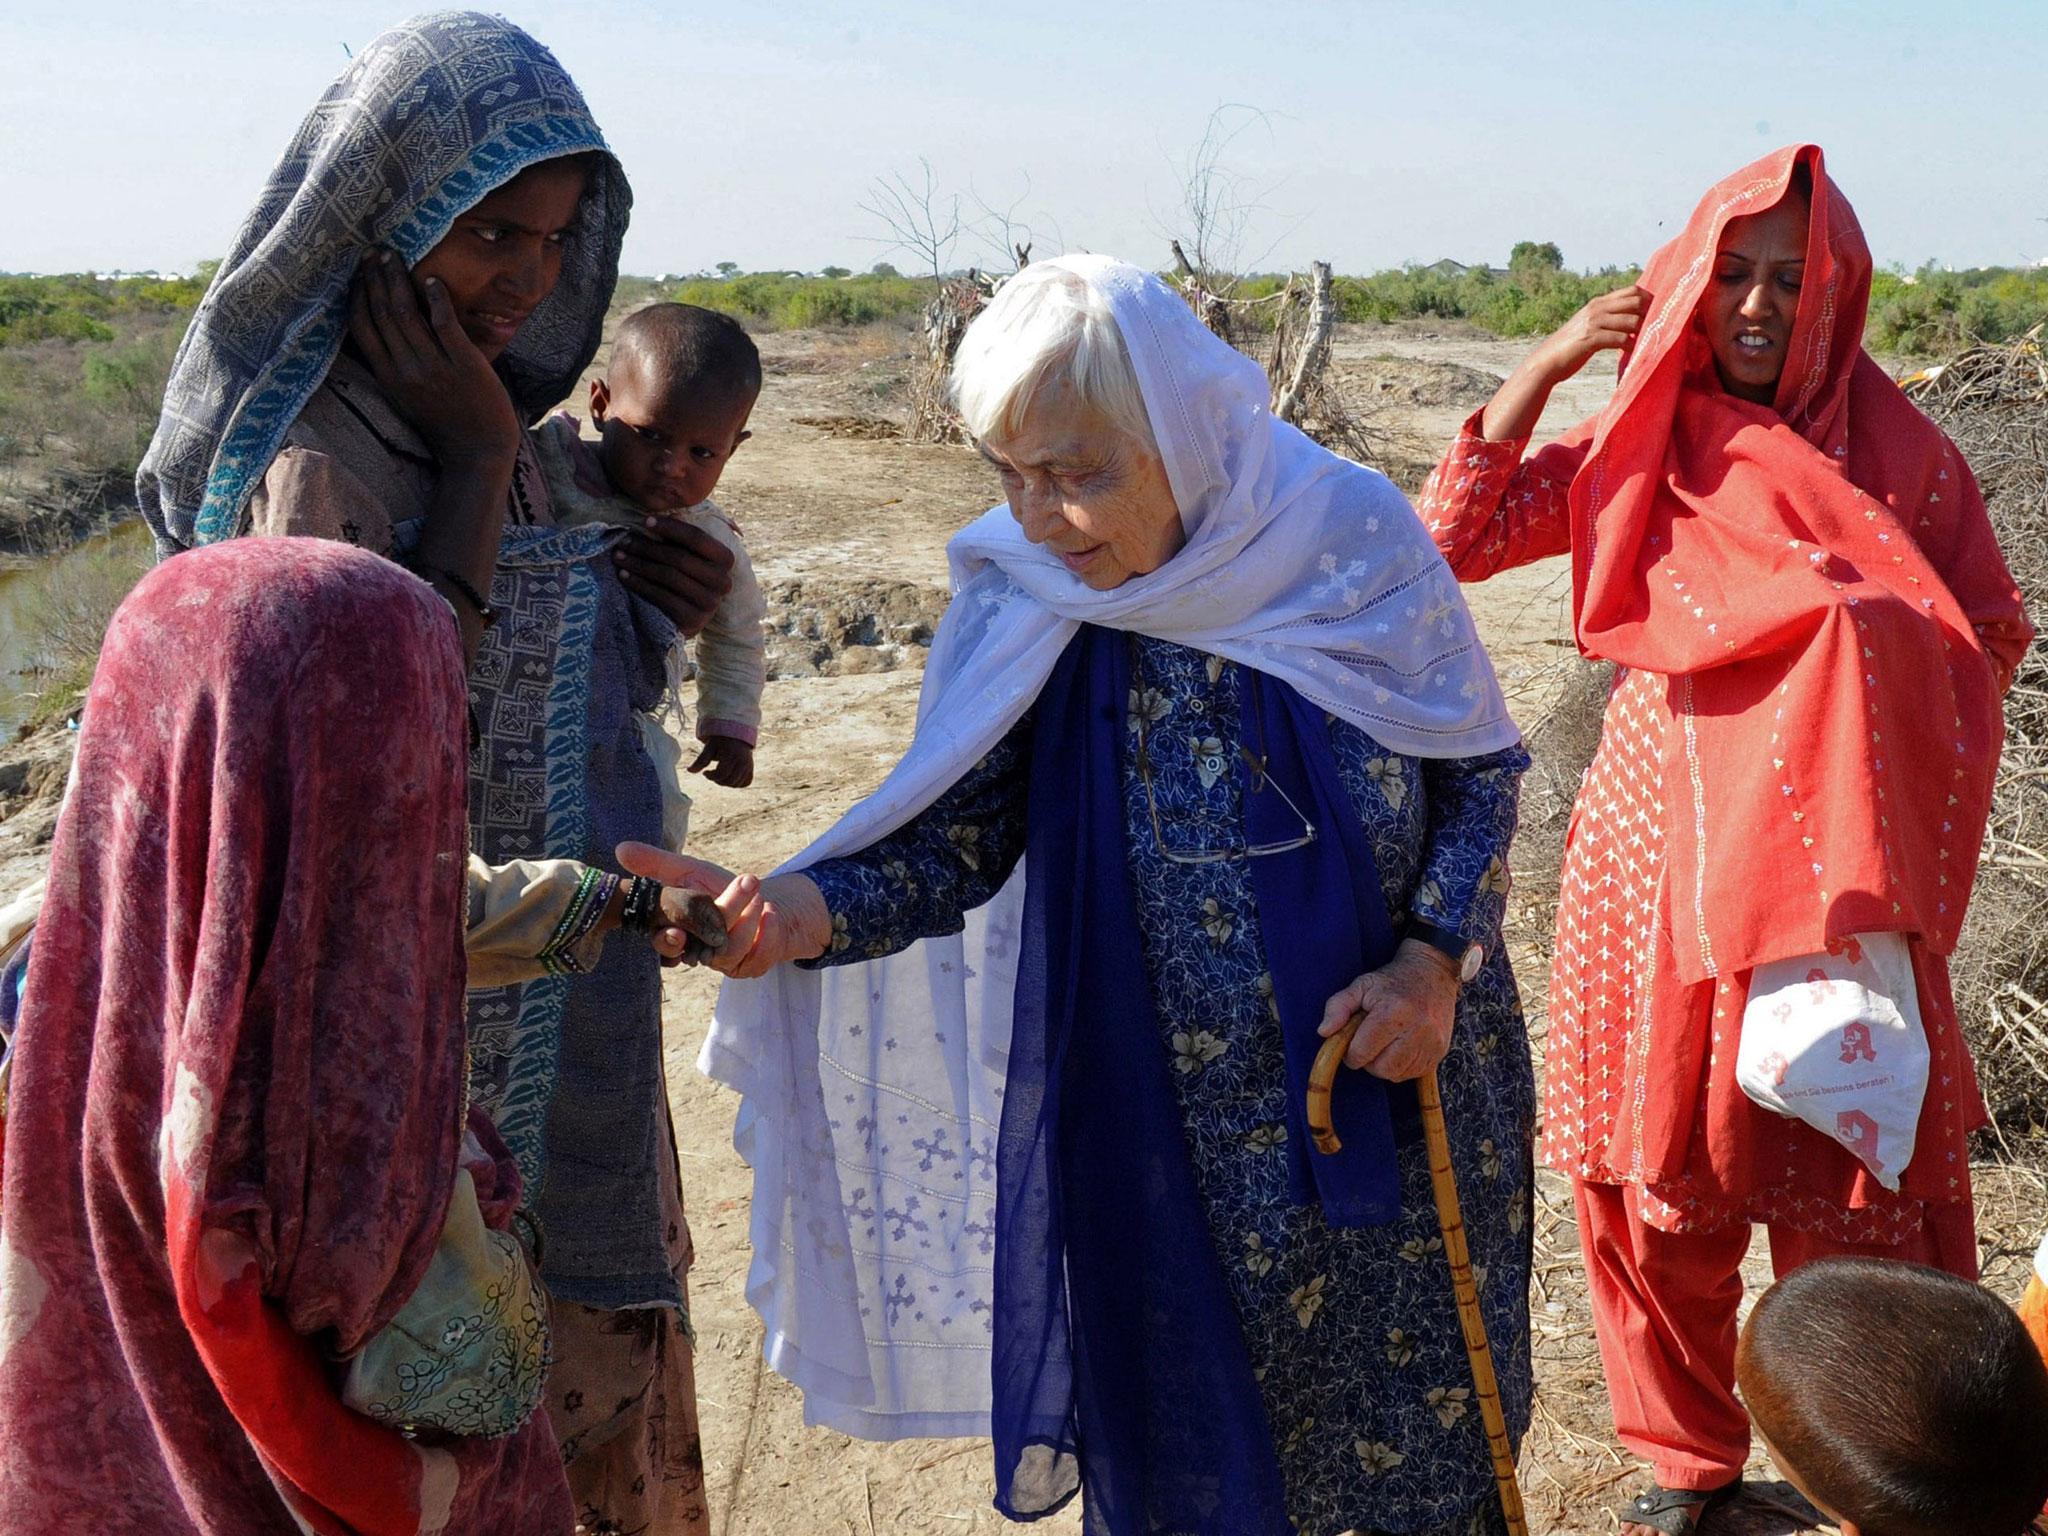 Ruth Pfau (C), head of a Pakistani charity fighting leprosy and blindness, meets people in flood-affected southern Pakistan in December 2010. She has died aged 87